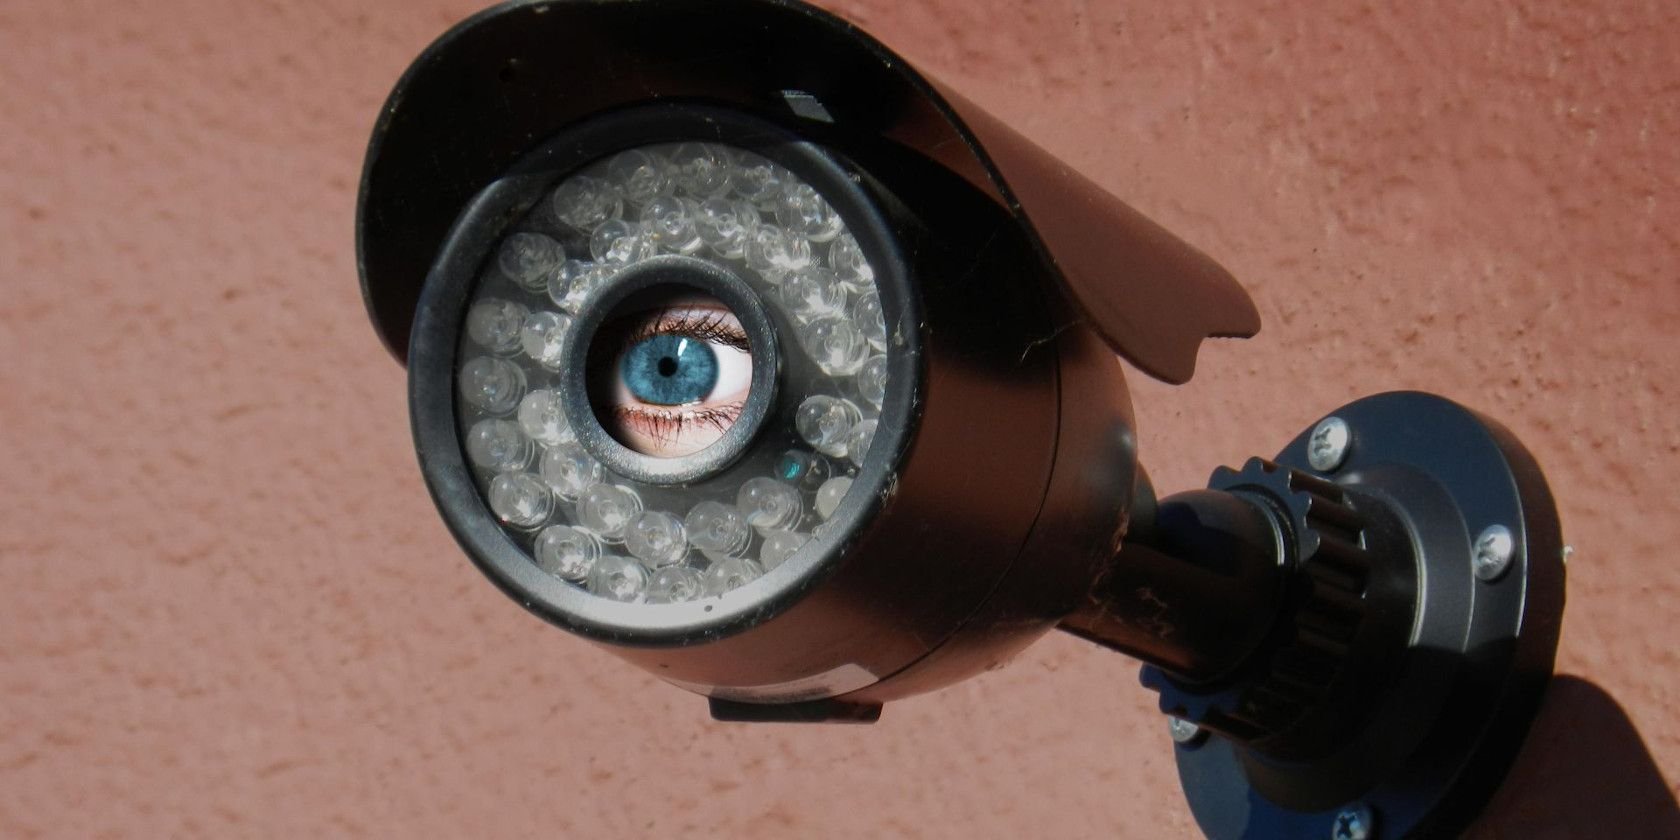 5 Common Social Media Privacy Issues (And How to Fix Them)